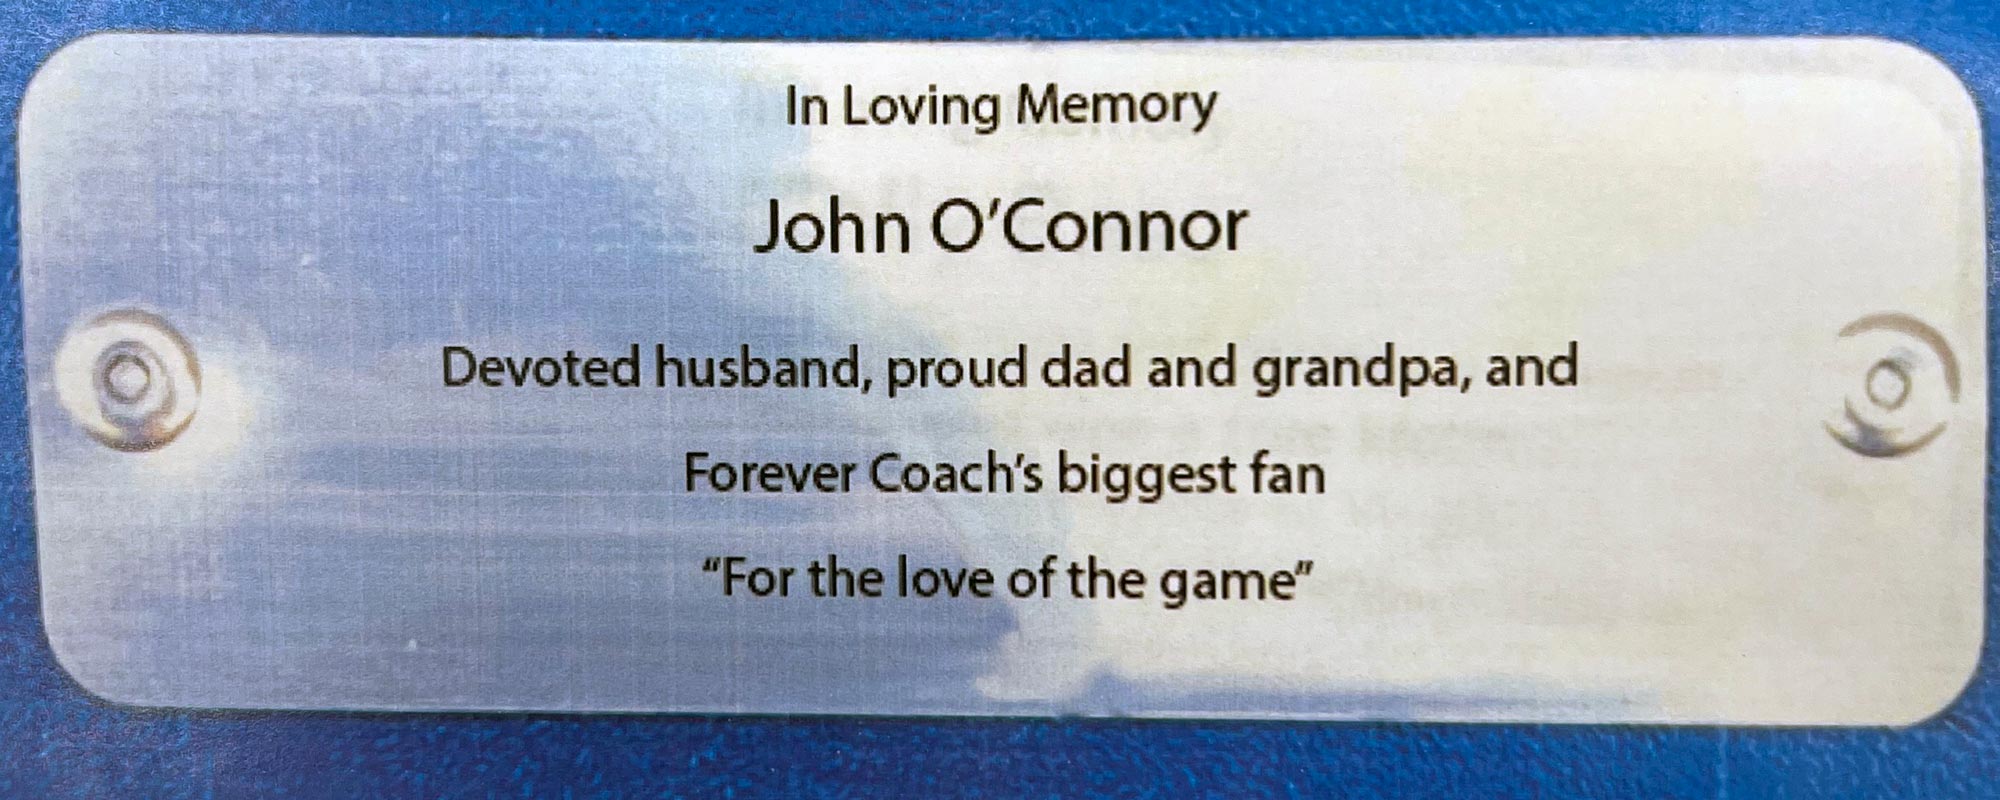 Plaque inscribed with: In Loving Memory John O'Connor Devoted husband, proud dad and grandpa, and Forver Coach's biggest gan "For the love of the game"